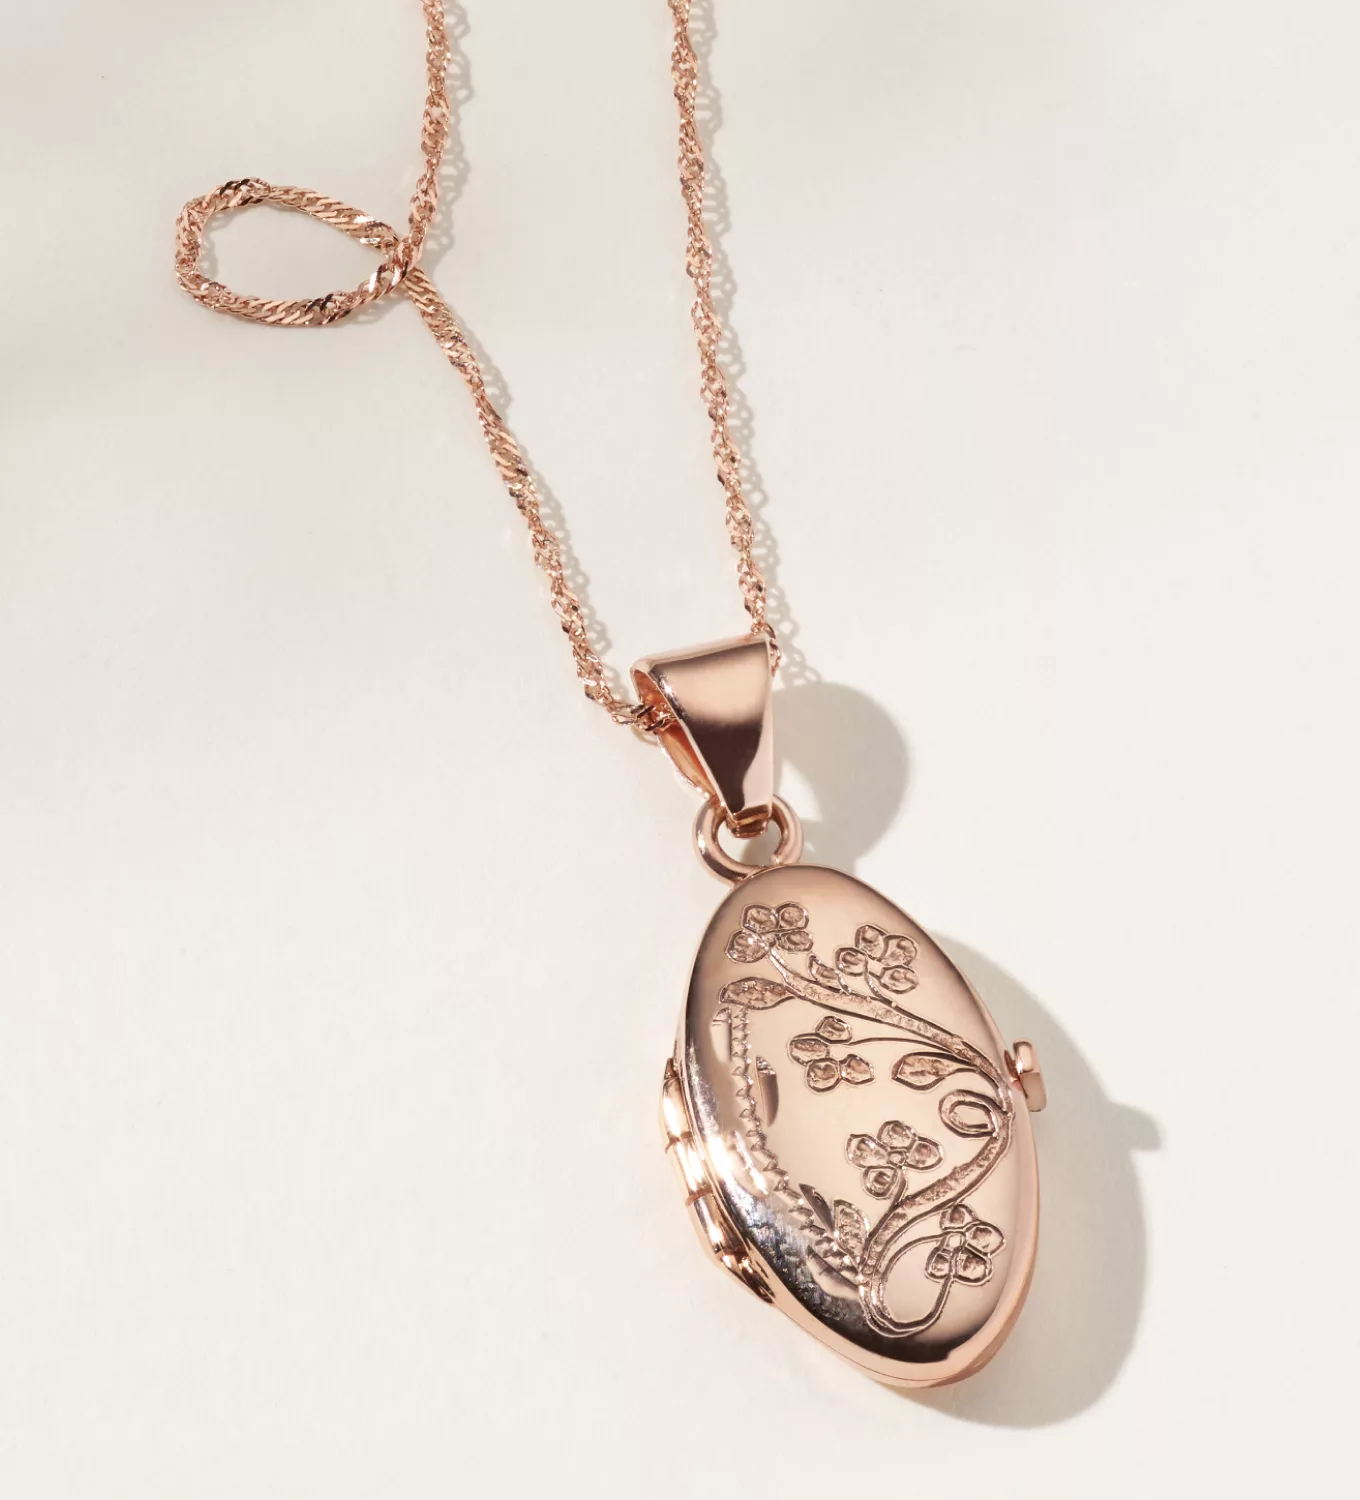 rose gold locket Floral 14K Rose Gold Oval Locket (20 in) This beautiful locket features a floral engraving on the front and a photo slot inside to keep loved ones close. Crafted in vivid 14-karat rose gold, it hangs from a matching adjustable Singapore chain. Add an engraving to the back for further personalization. 